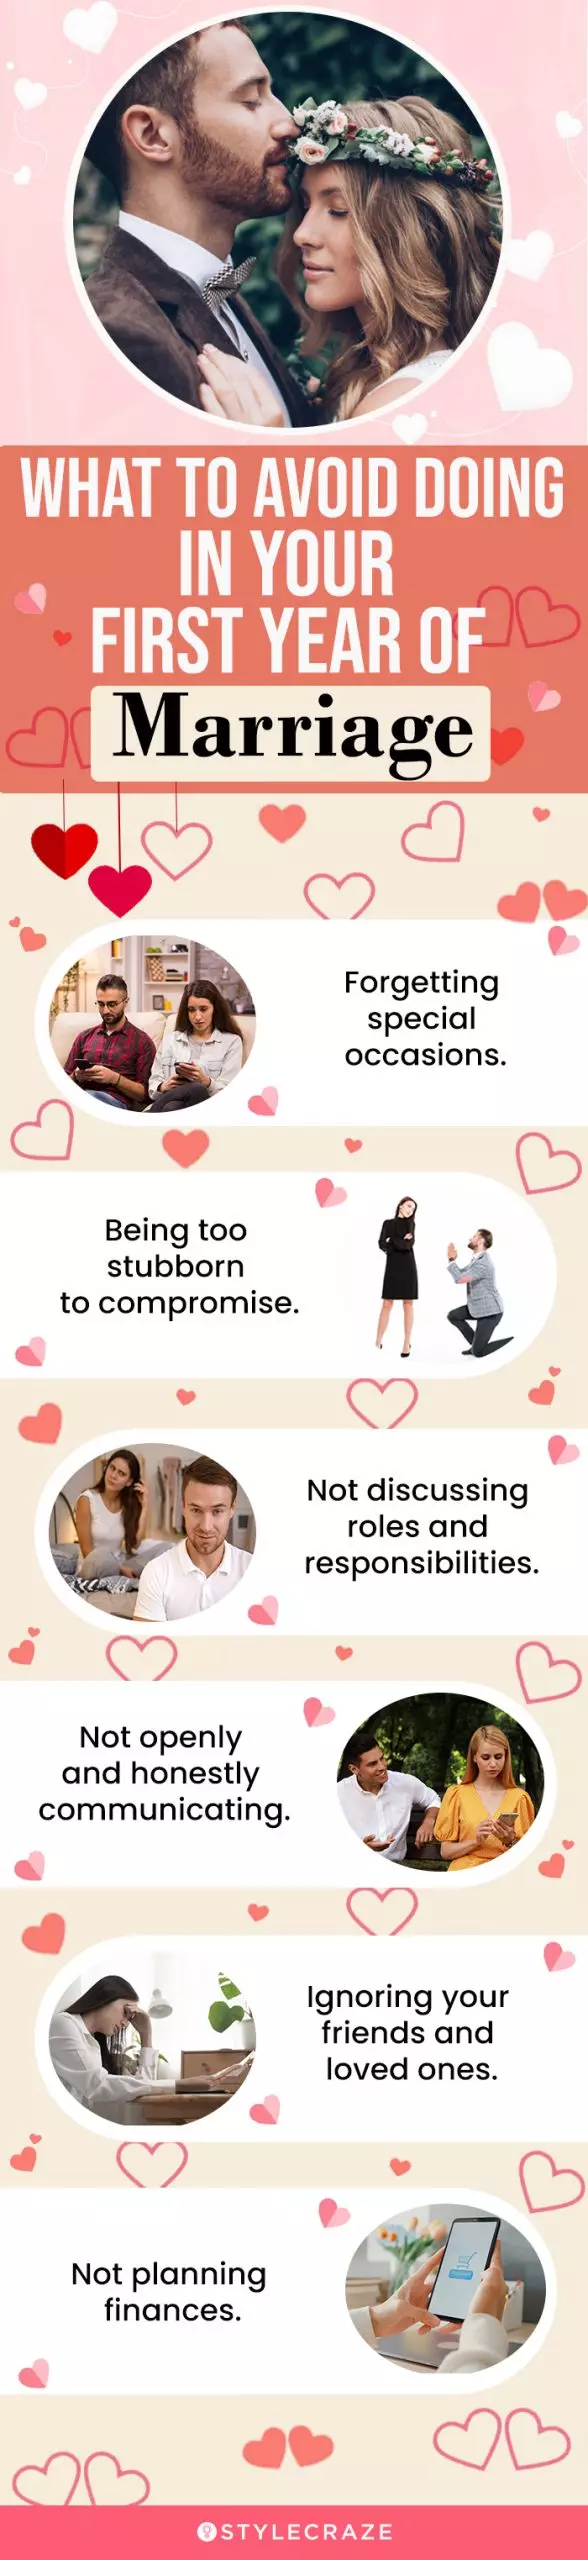 what to avoid doing in your first year of marriage (infographic)